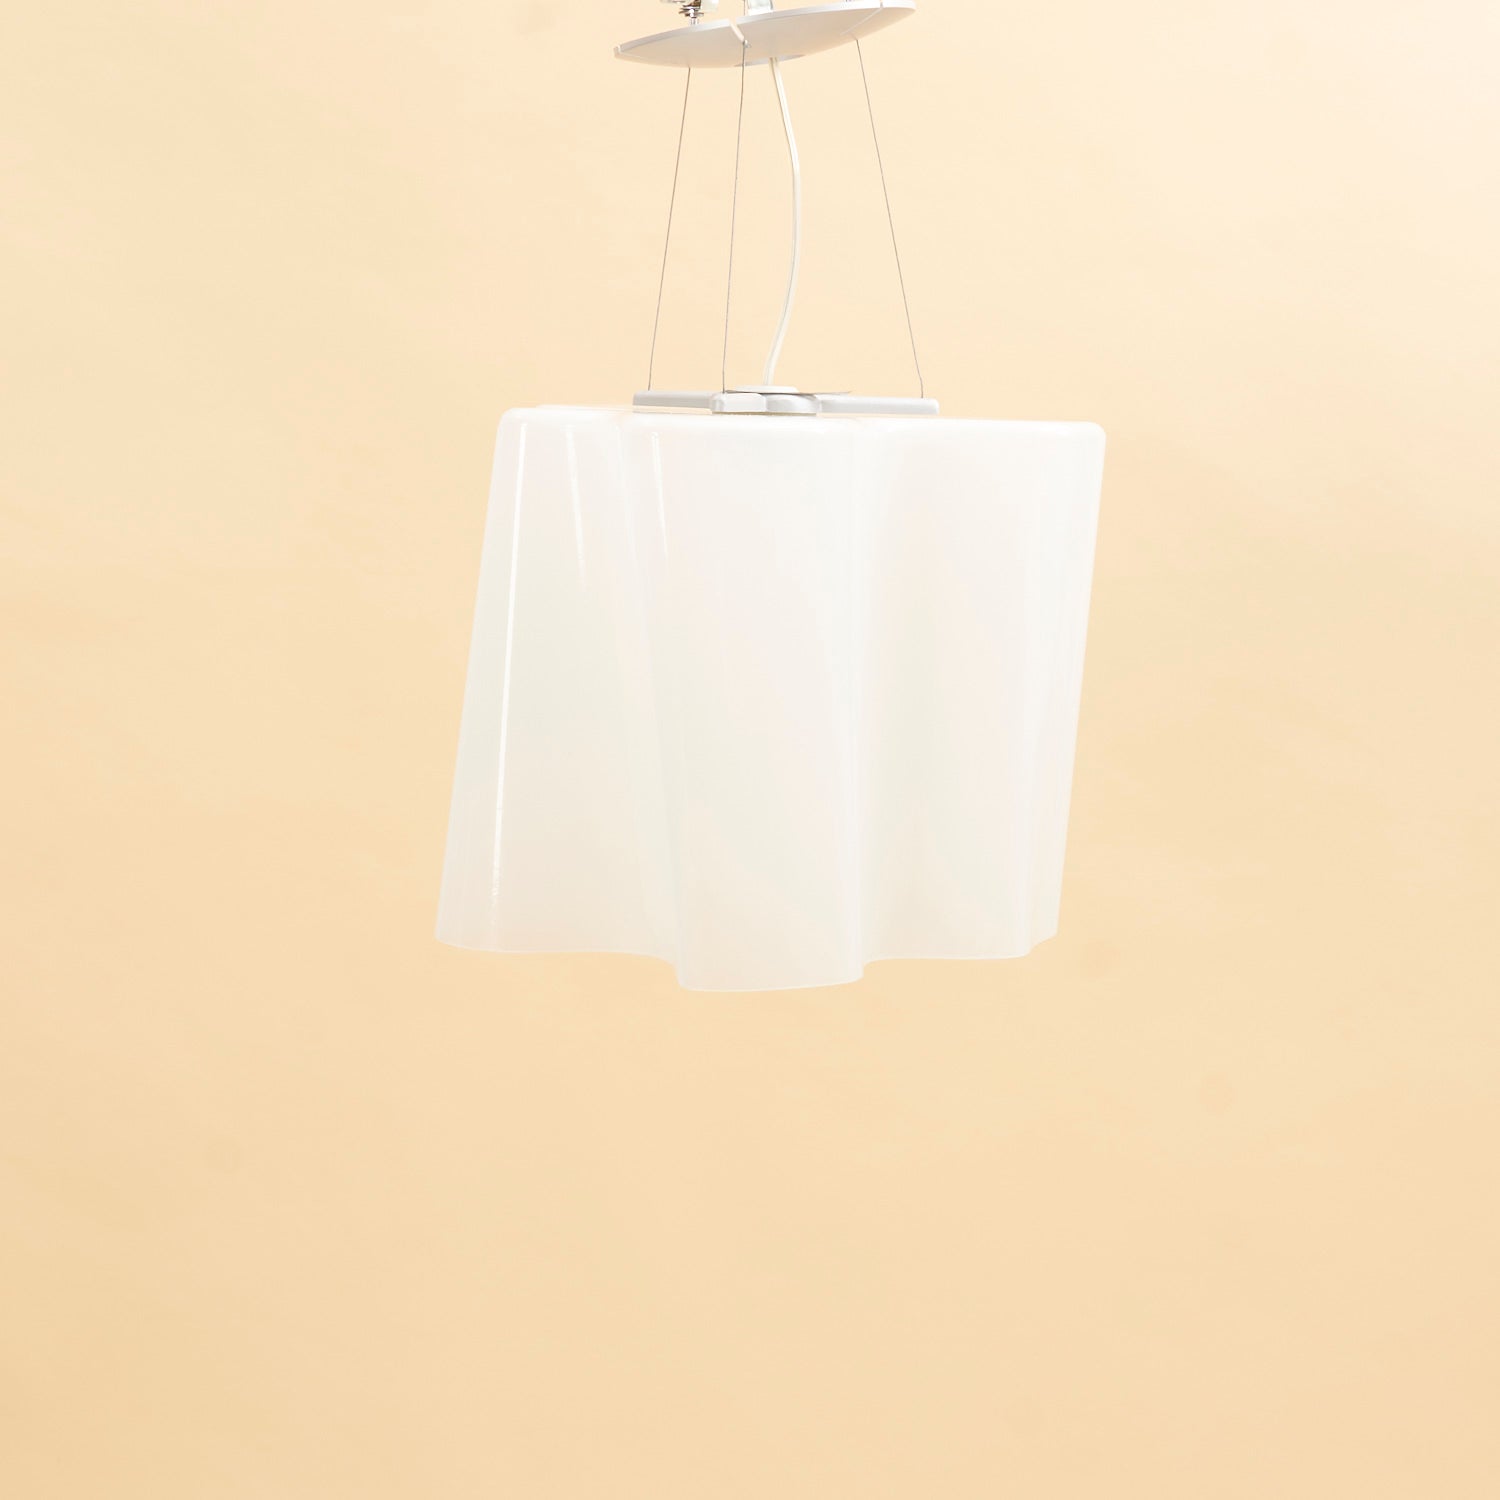 'Logico' Ceiling Lamp in Milky White by Artemide